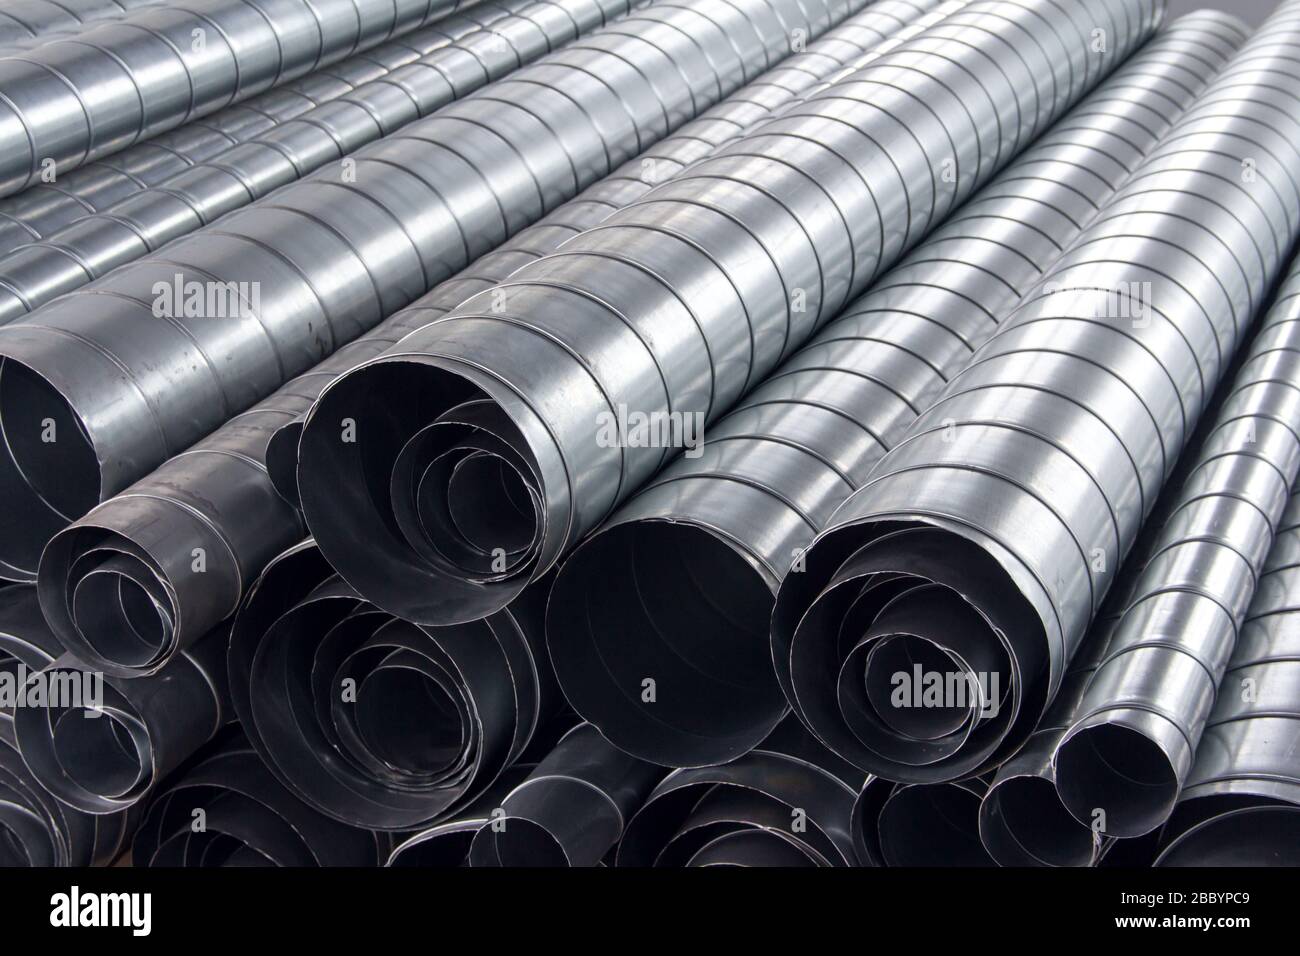 Steel pipes for ventilation system. Ventilation ducts components Construction equipment. Stock Photo